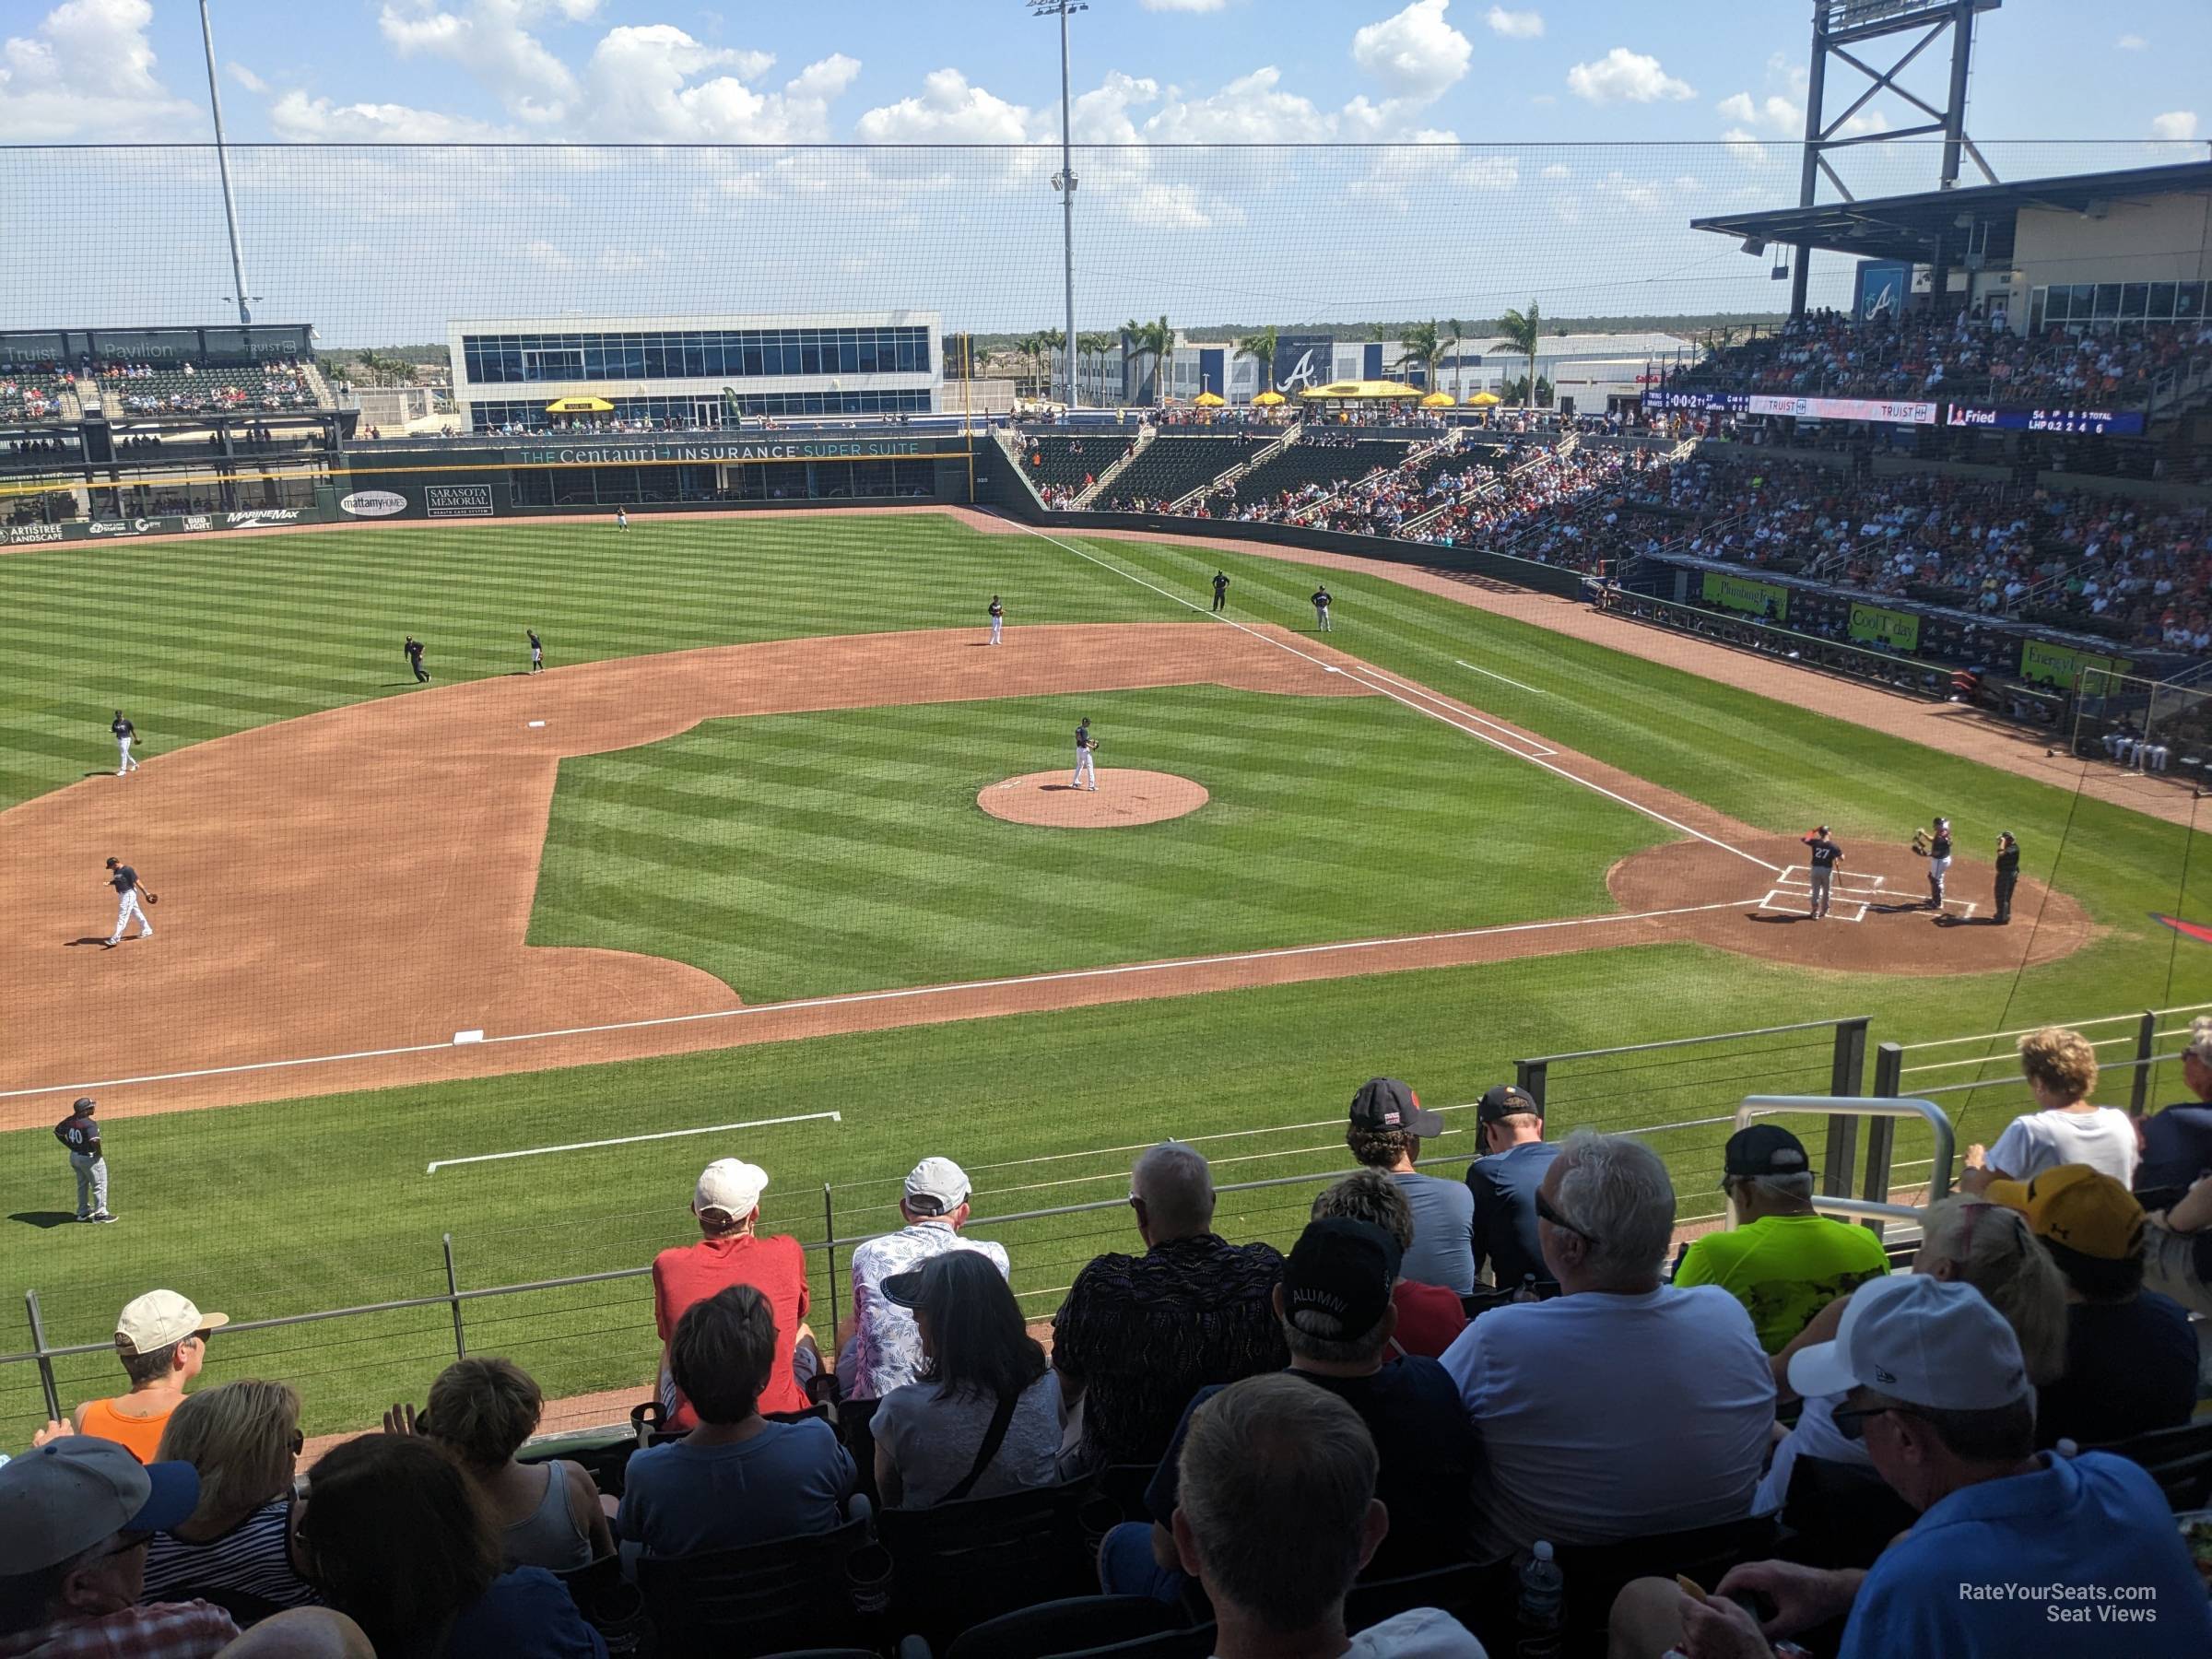 section 206, row 5 seat view  - cooltoday park